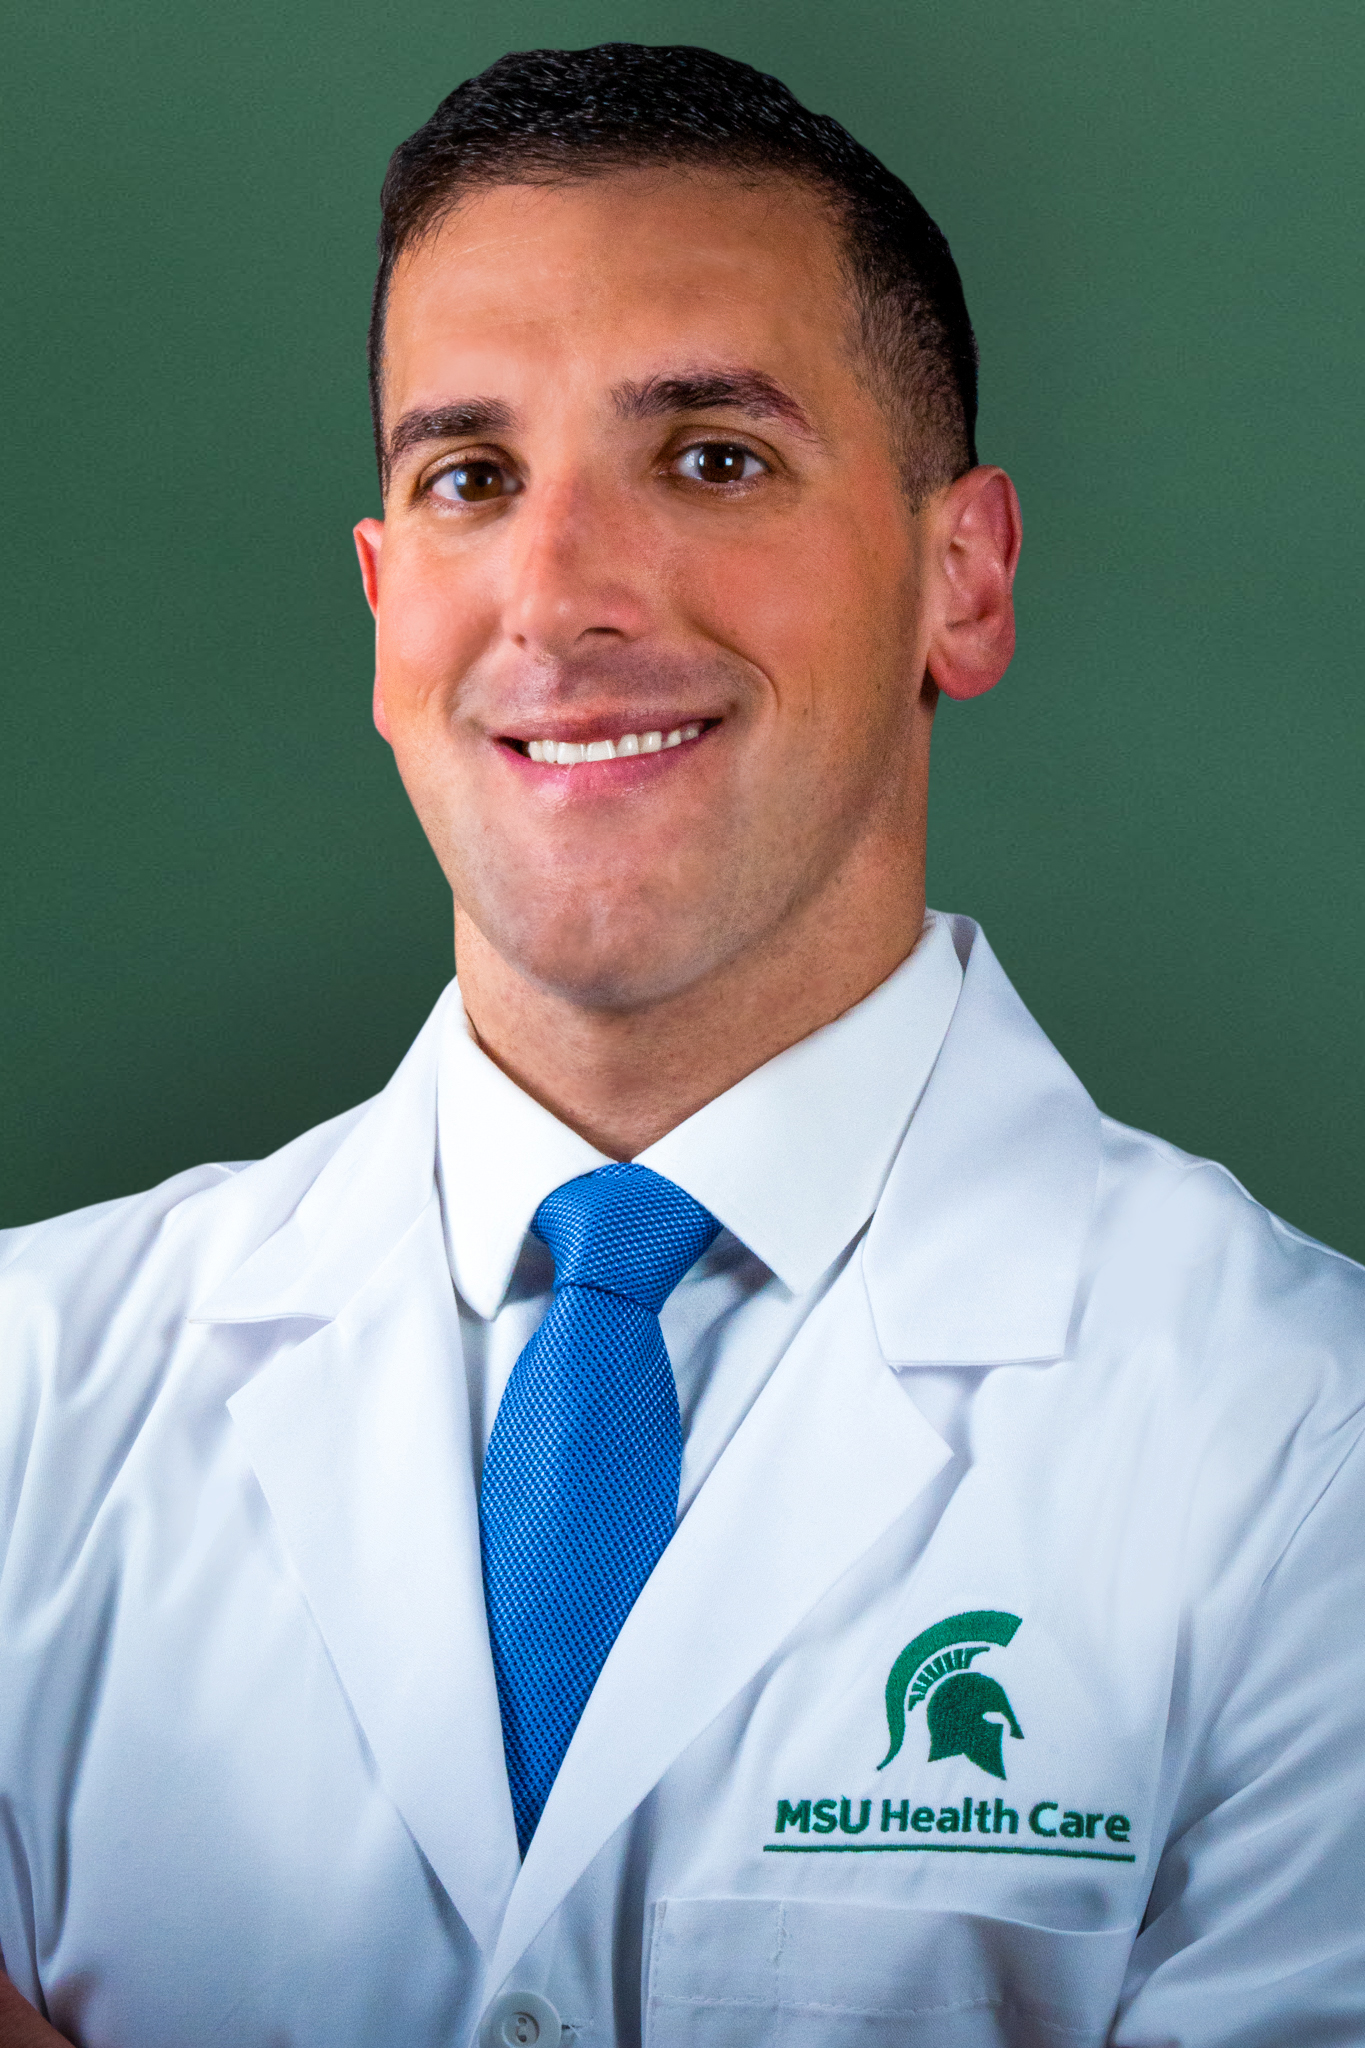 MSU Health Care surgeon recognized for his work on opioids-free pain management